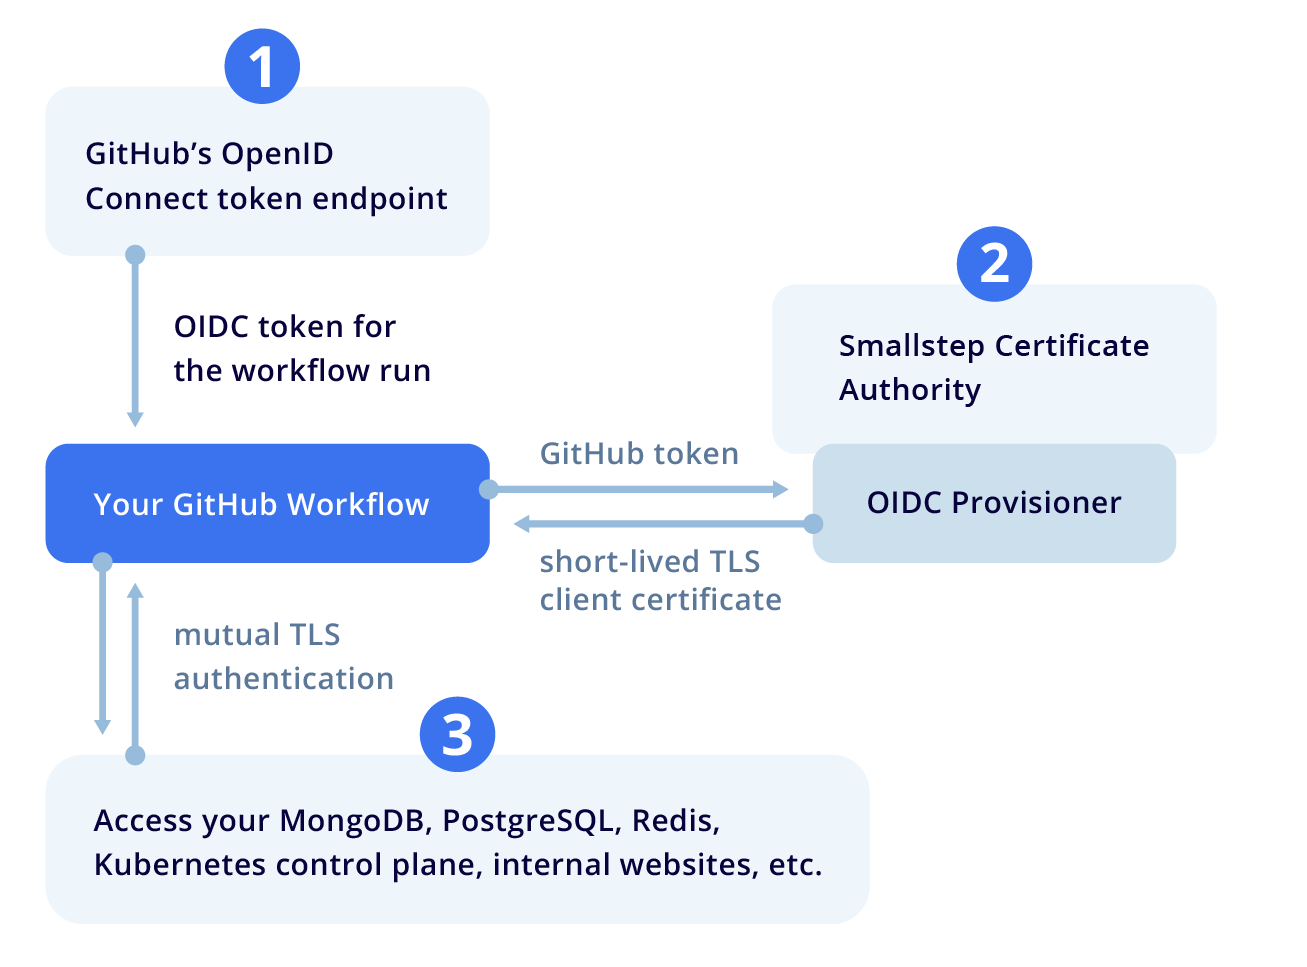 github-oidc-workflow-diagram@2x.png